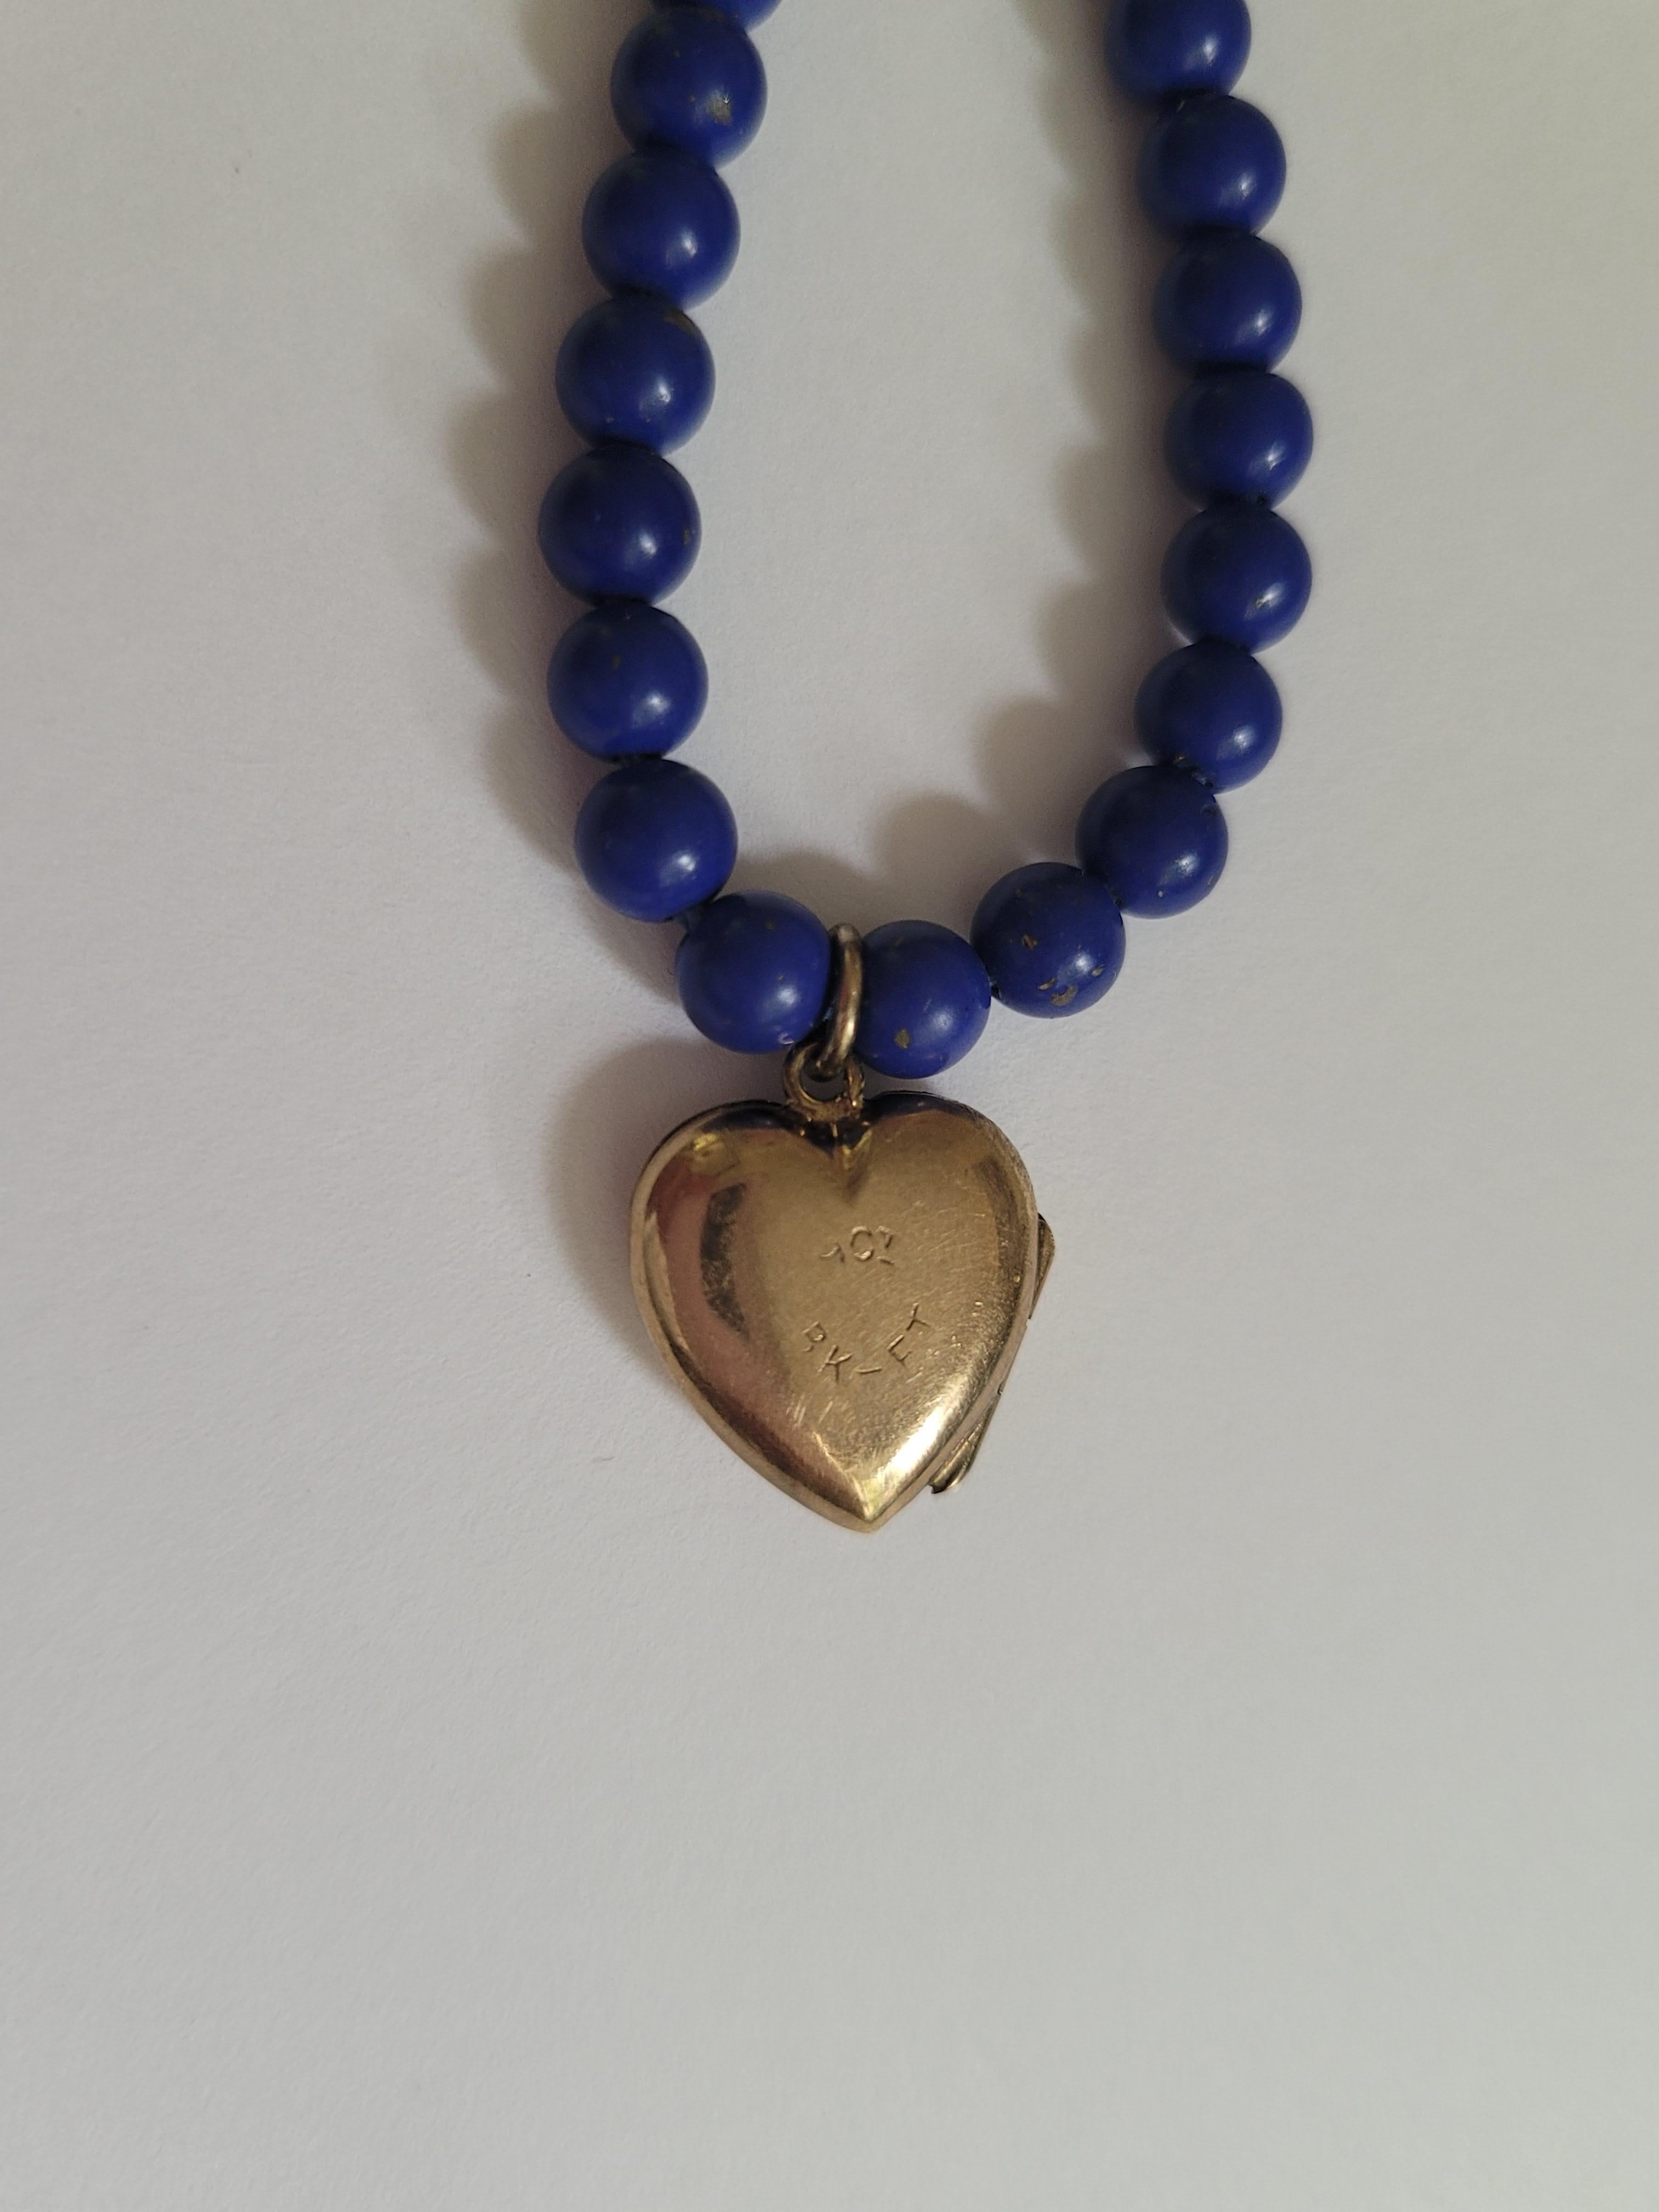 Vintage Heart Locket and Lapis Lazuli Beads necklace For Sale 2